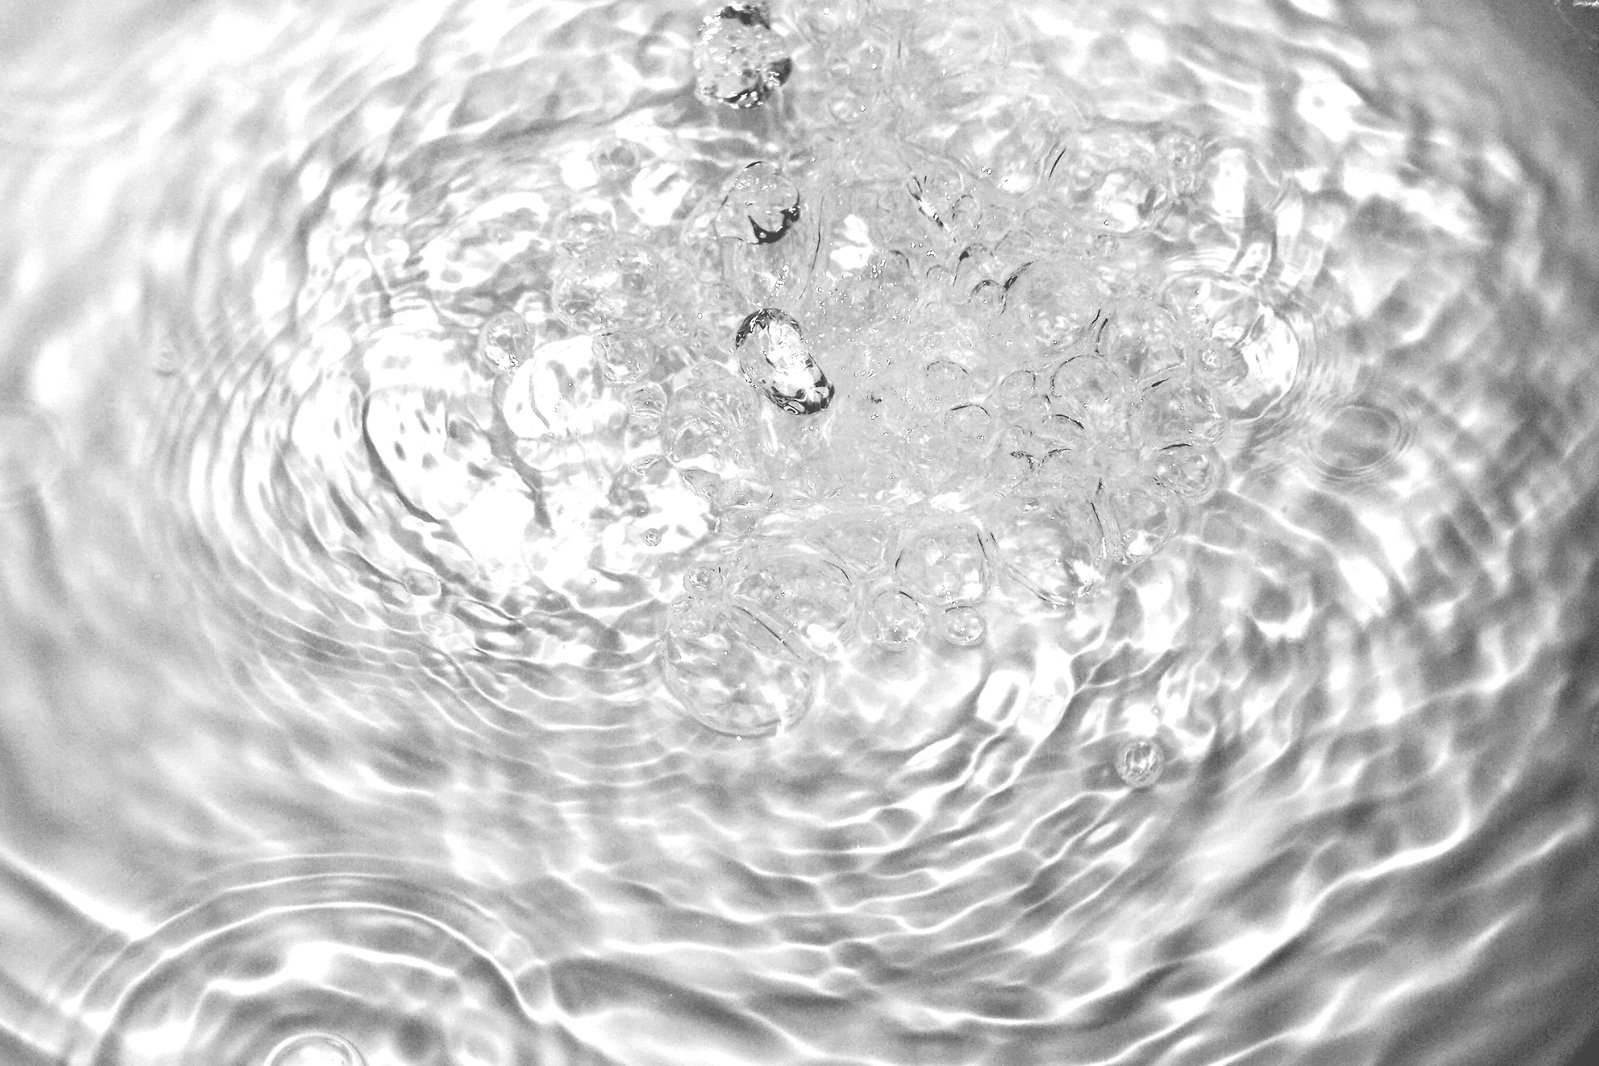 a water source is shown with several droplets